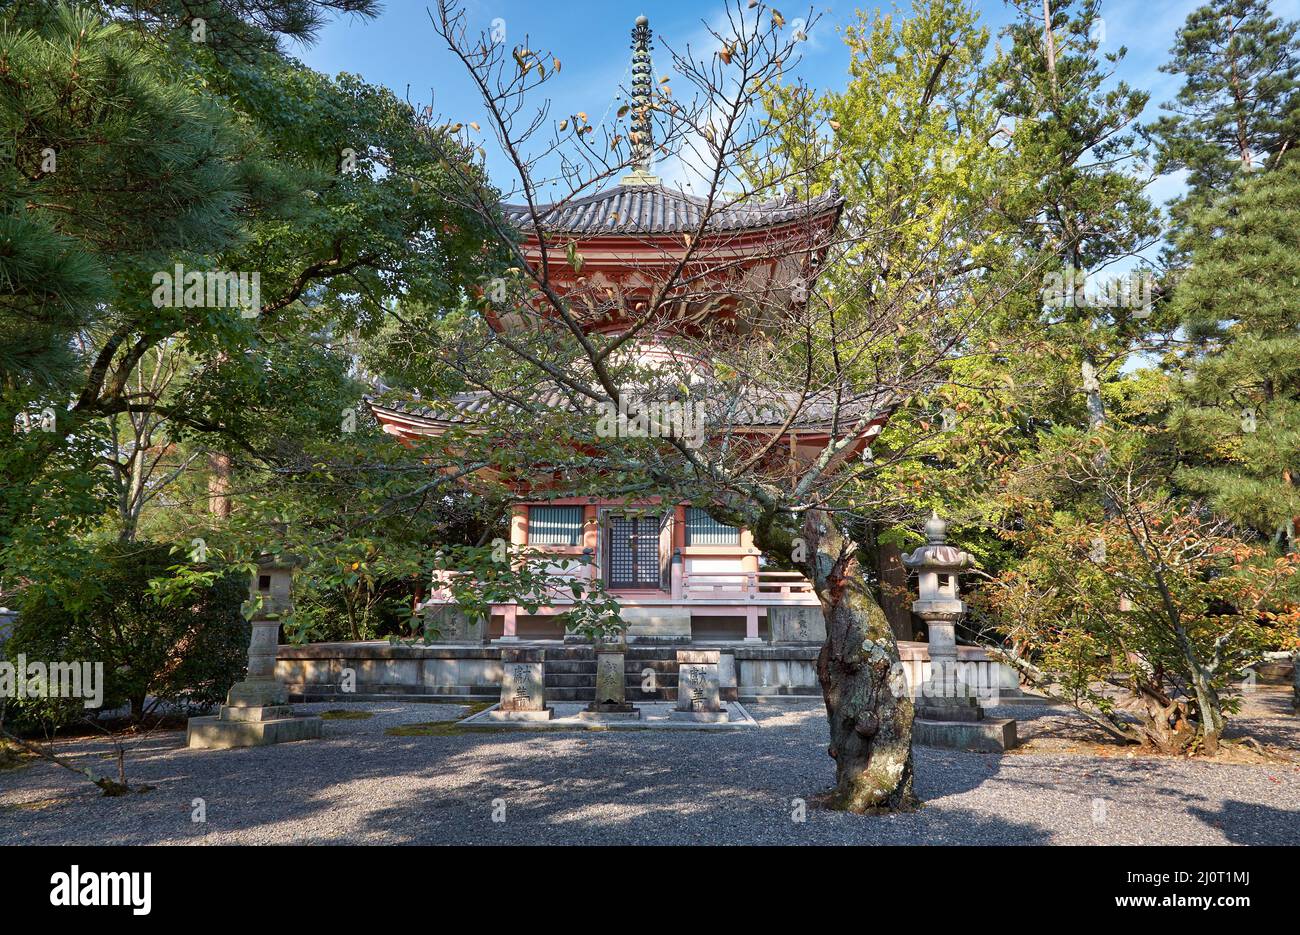 Tahoto (Many-jewelled pagoda) of Chion-in temple complex. Kyoto. Japan Stock Photo